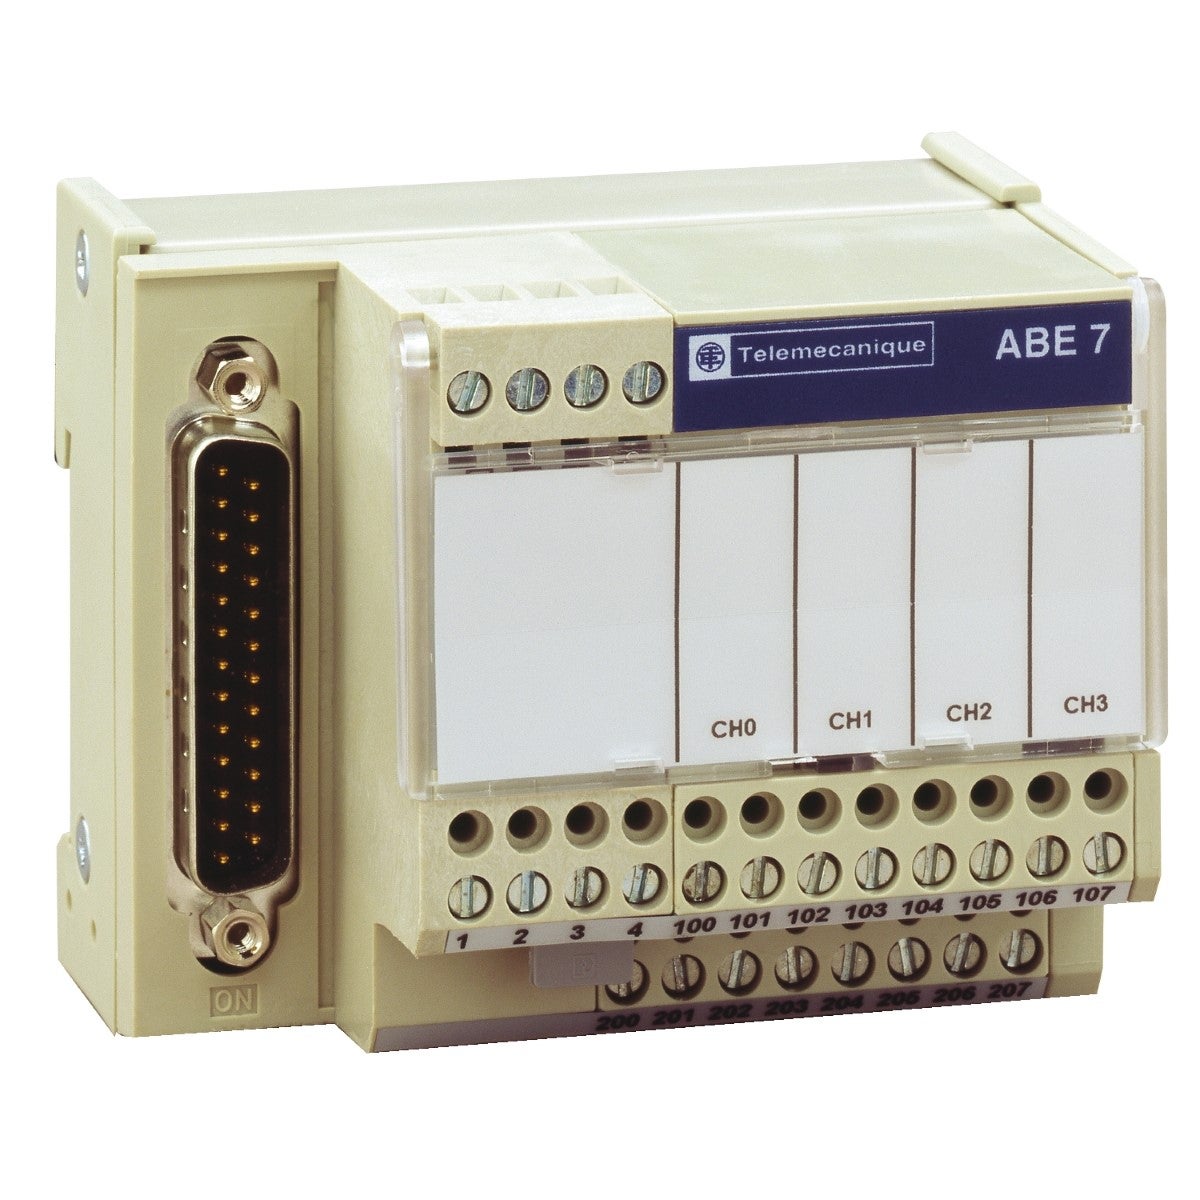 connection sub-base ABE7 - for distribution of 4 analog channels protected